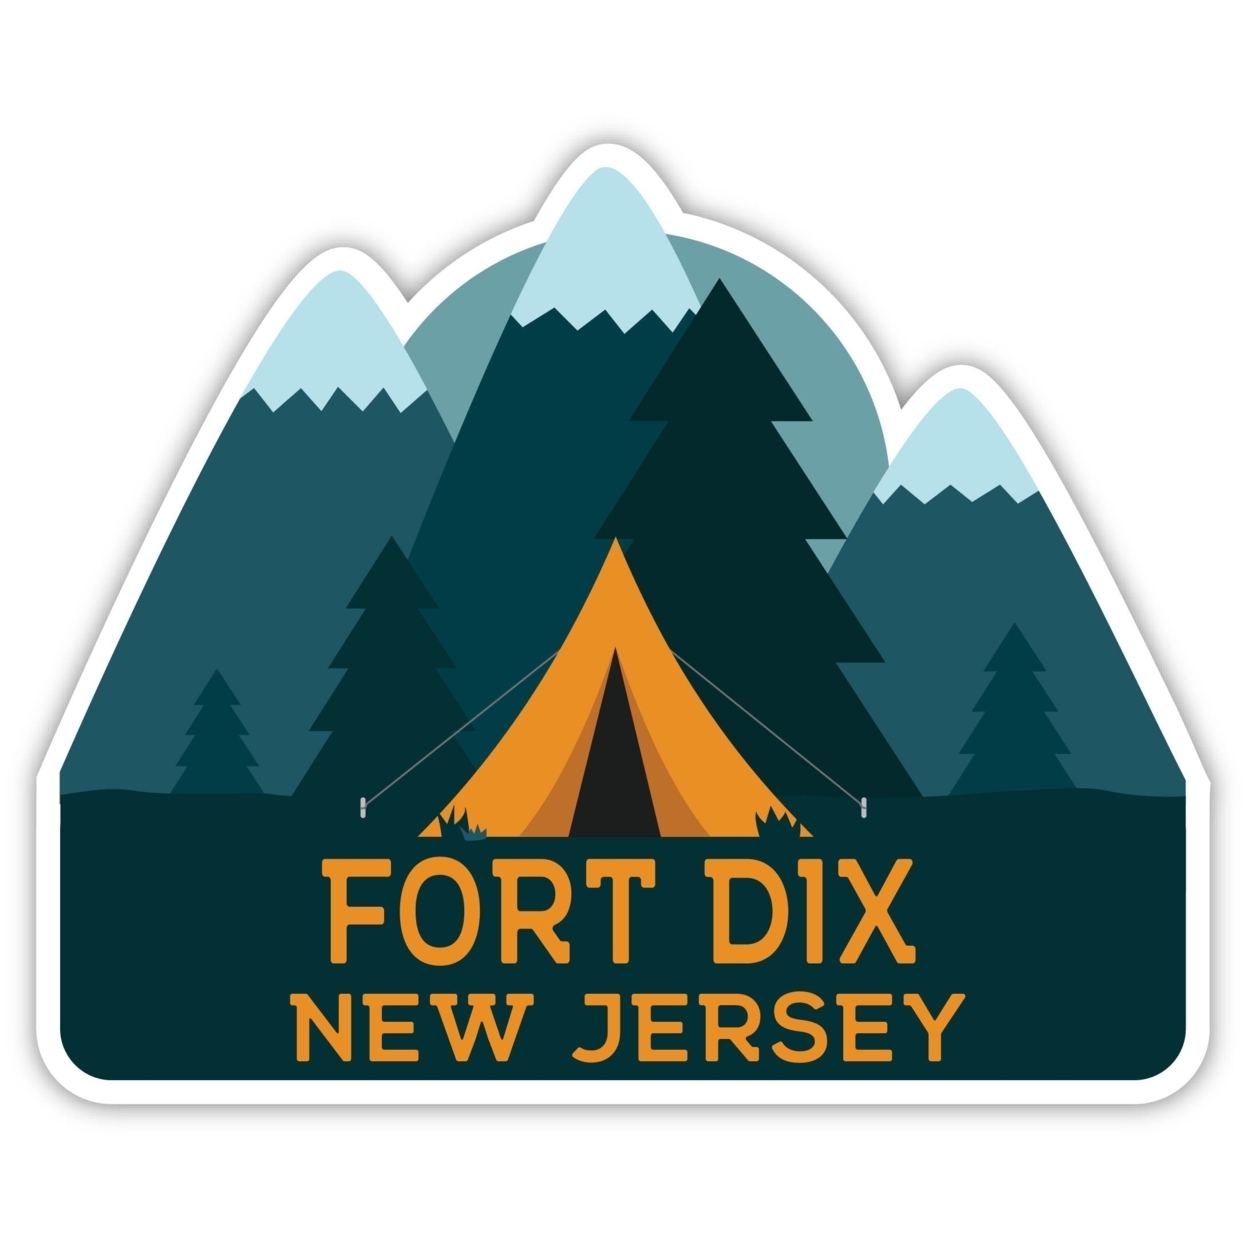 Fort Dix New Jersey Souvenir Decorative Stickers (Choose Theme And Size) - 4-Pack, 12-Inch, Tent